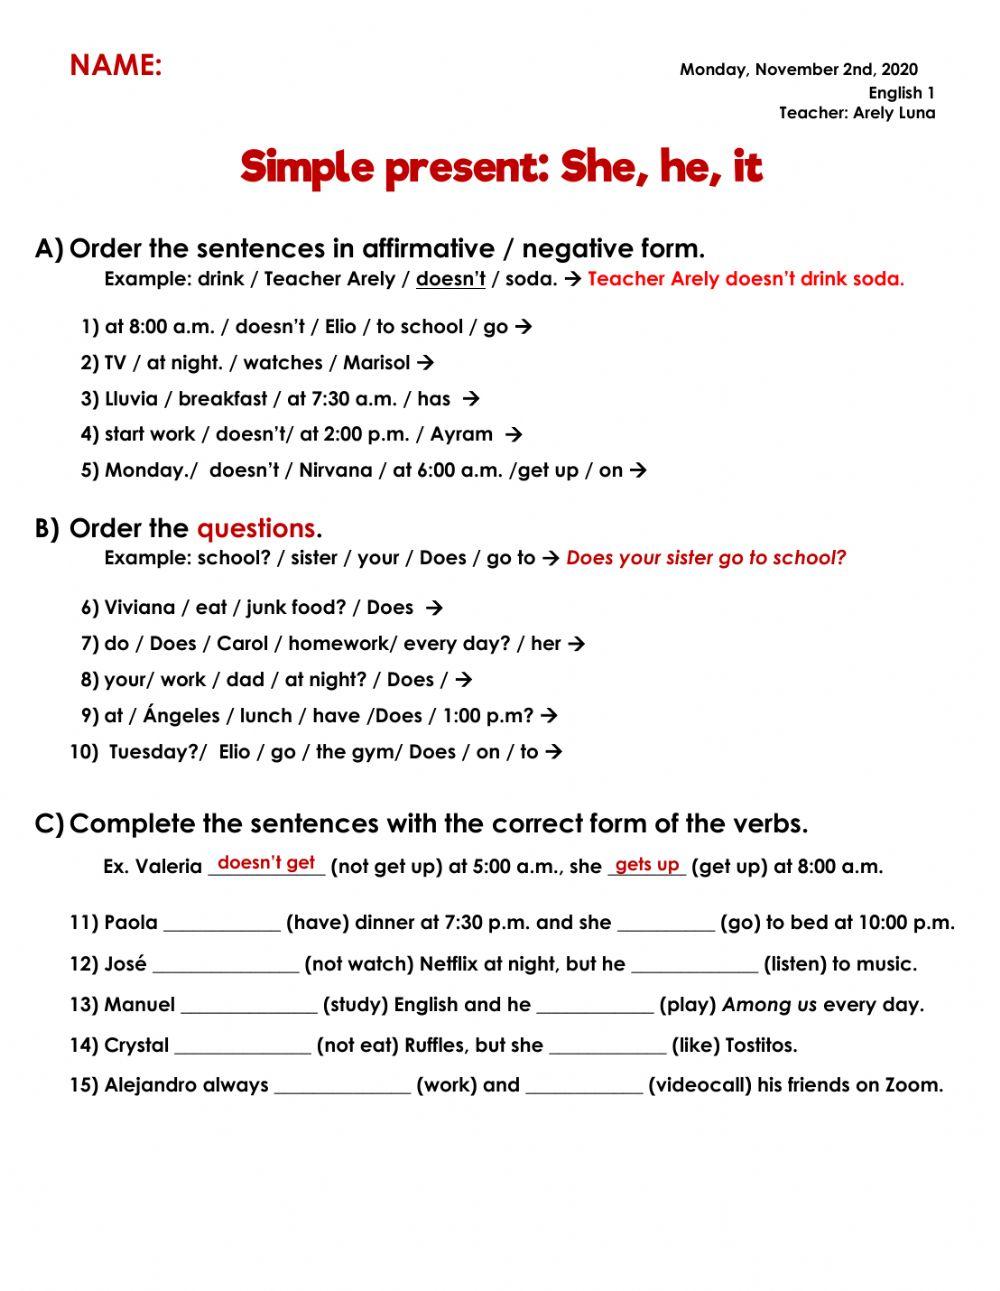 Simple present: She, he, it